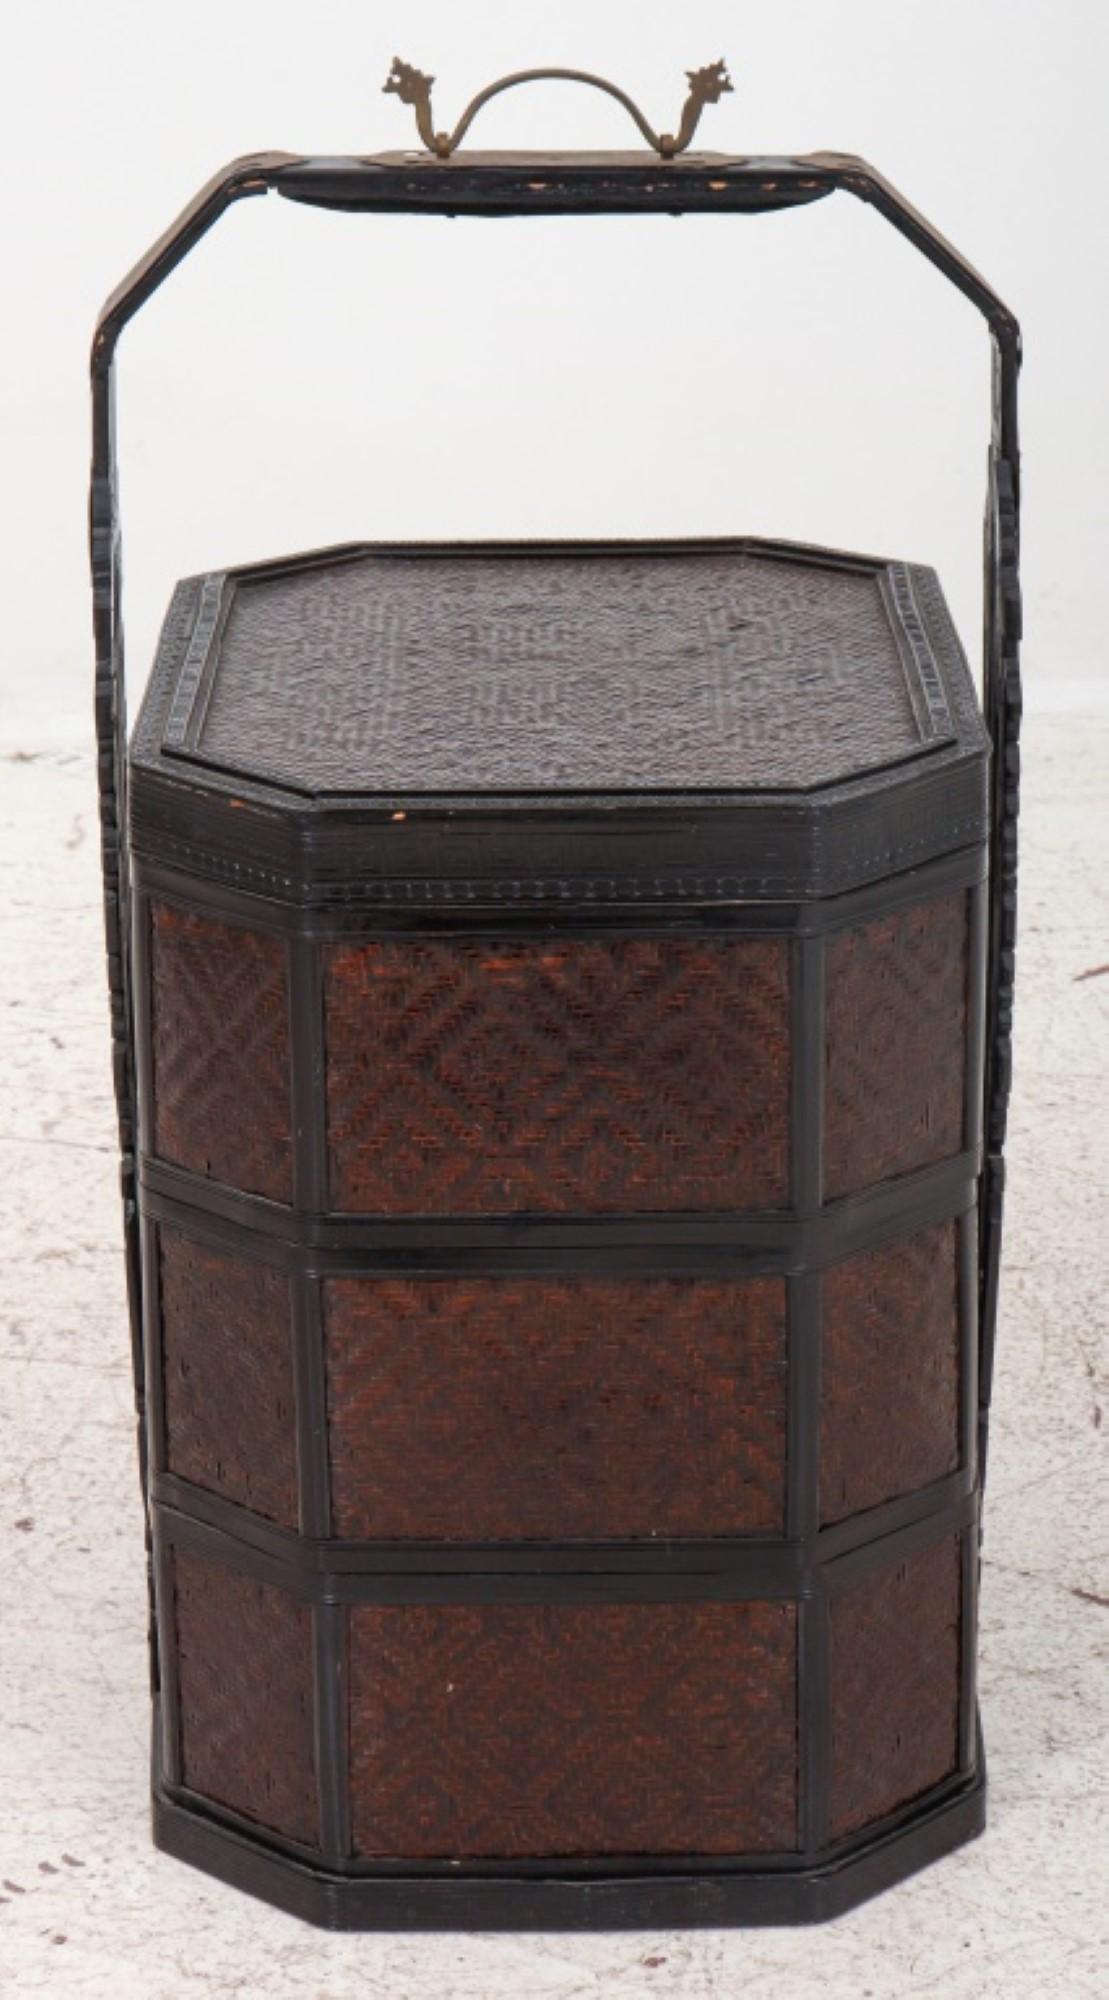 
The dimensions for the Japanese steel mounted bentwood and woven rush tiered stacking basket with handle are as follows:

Height: 27